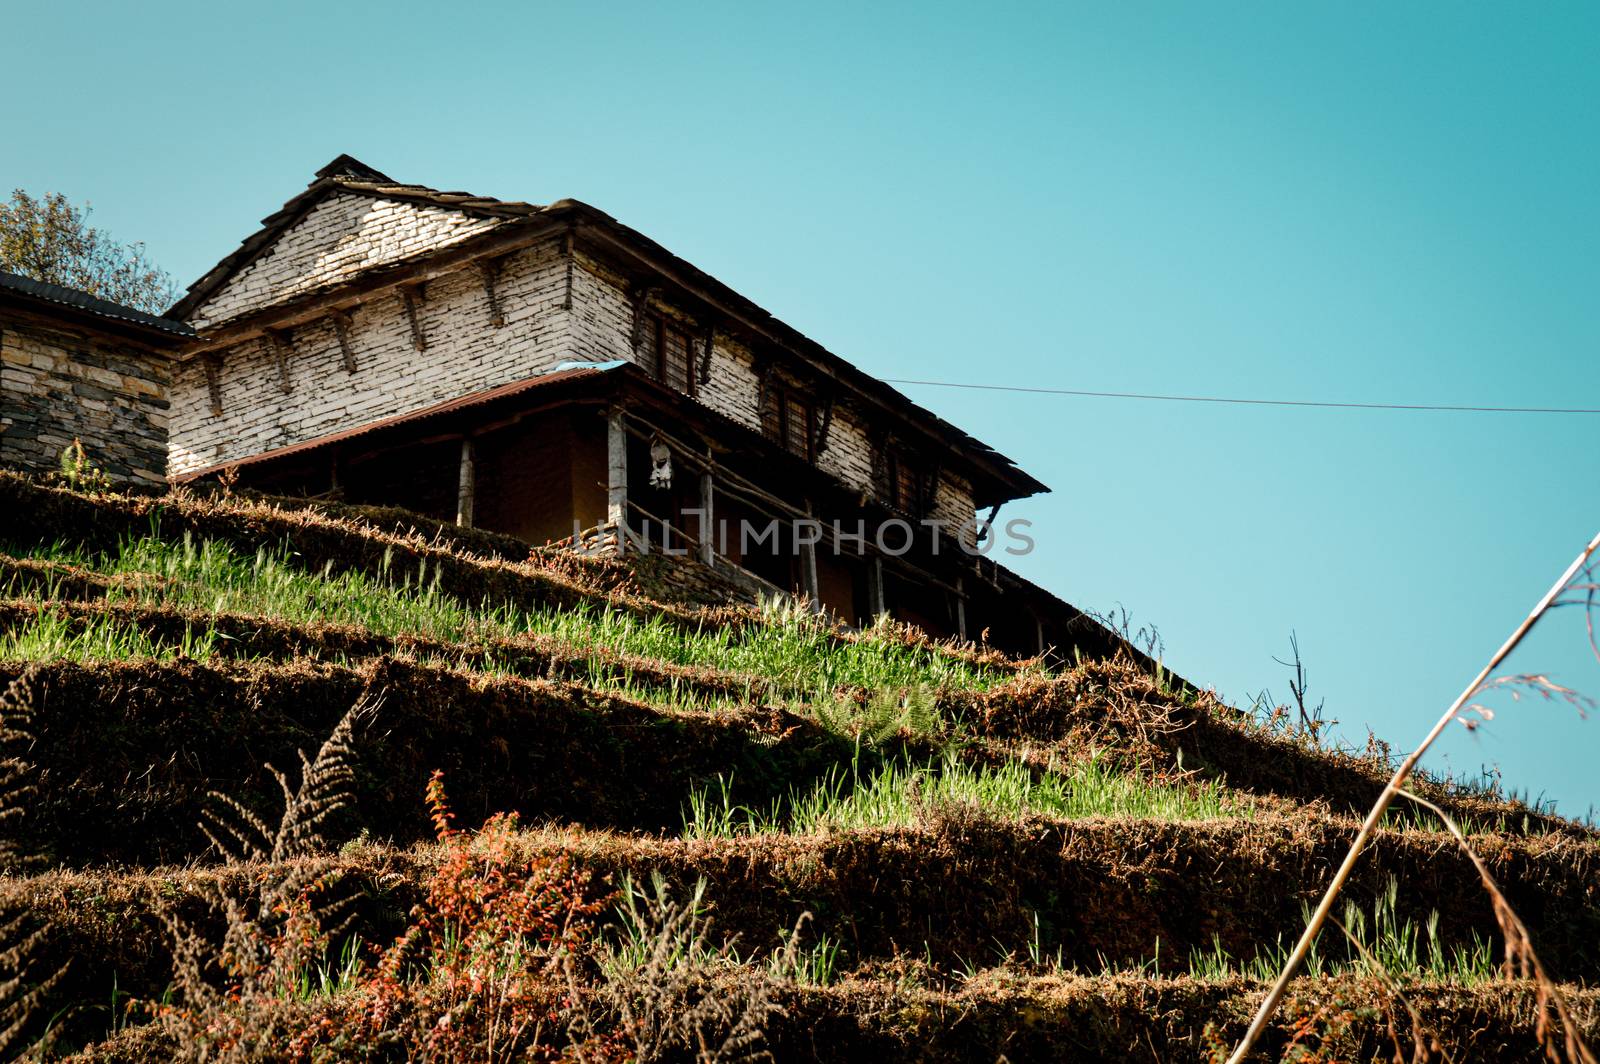 Traditional Nepalese mud house in Poonhill Ghorepani Pokhara in Nepal